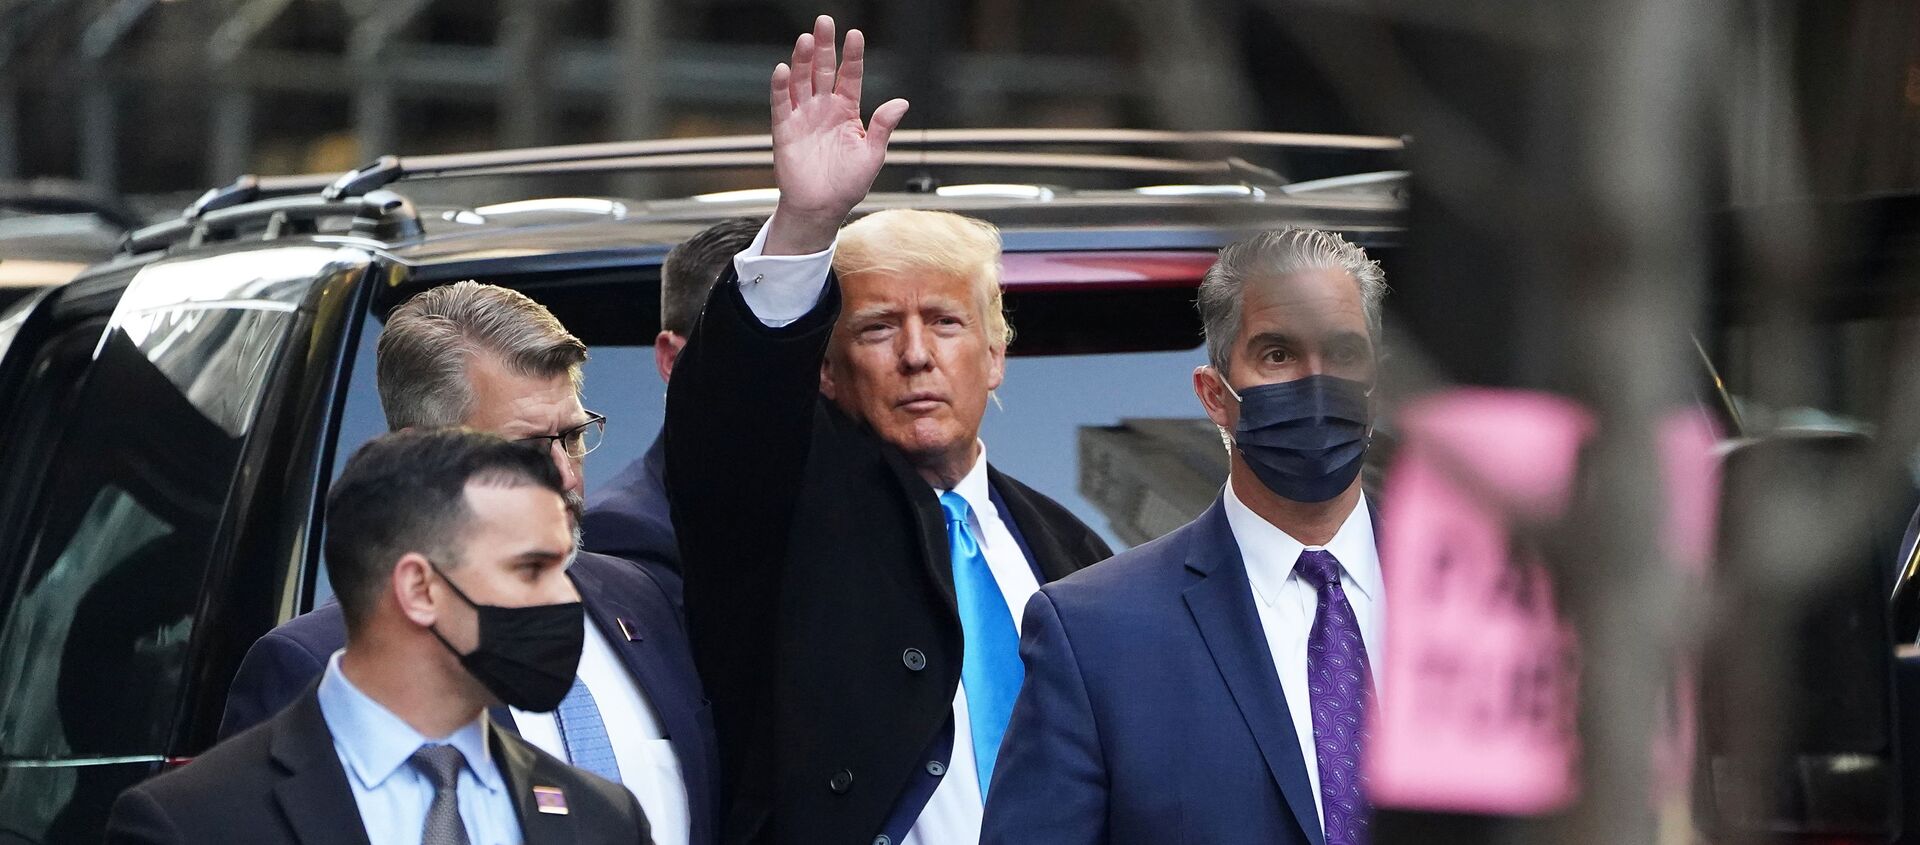 Former U.S. President Donald Trump acknowledges people as he gets in his SUV outside Trump Tower in the Manhattan borough of New York City, New York, U.S., March 9, 2021 - Sputnik International, 1920, 17.03.2021